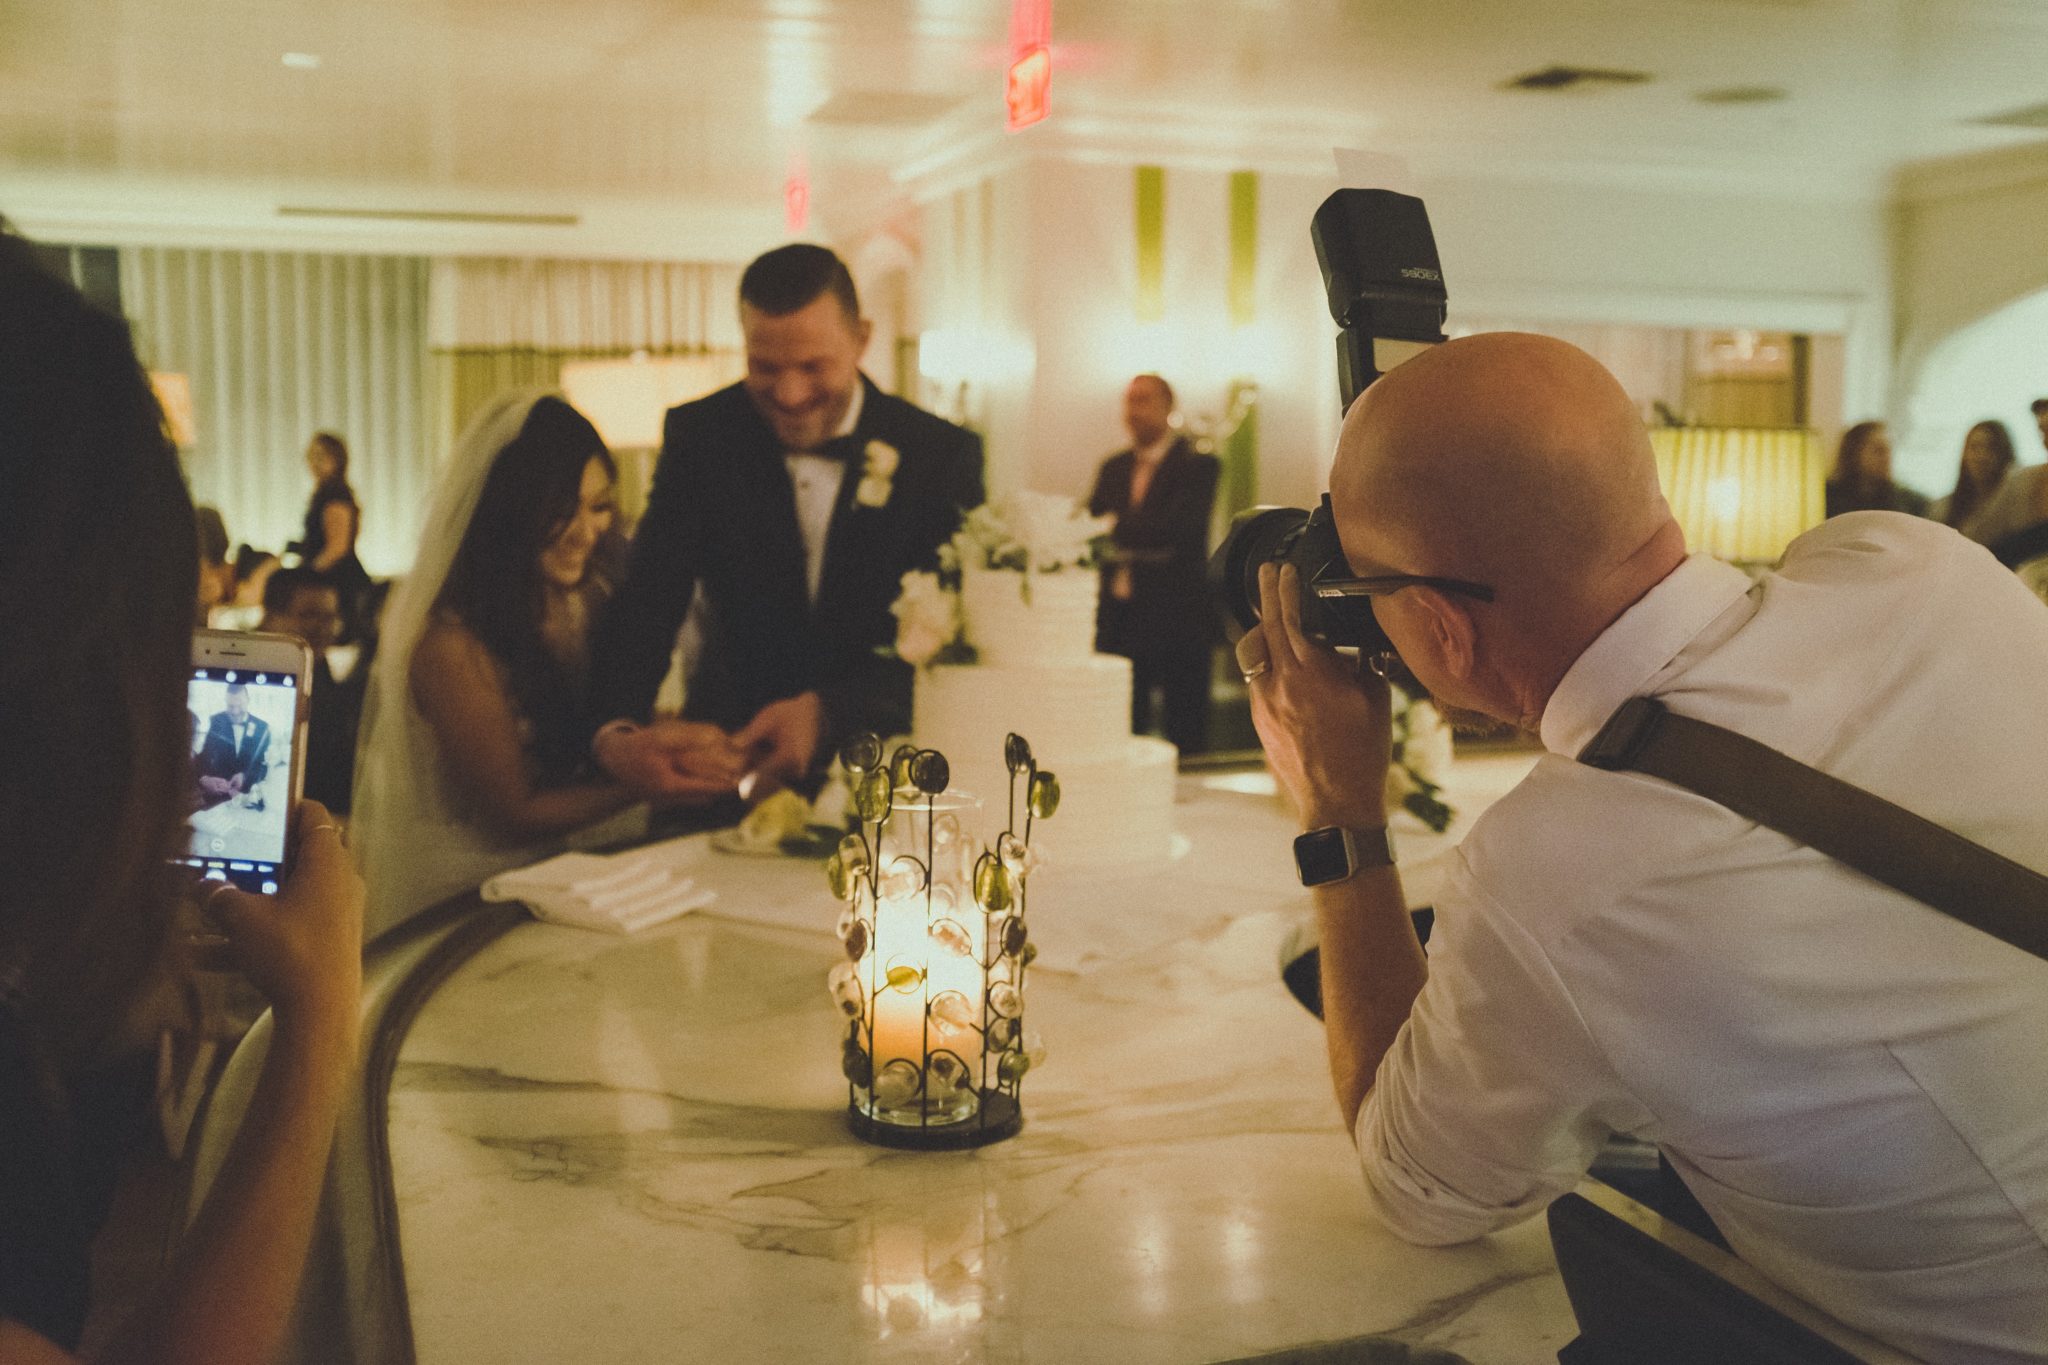 Photographer taking an image of wedded couple cutting their wedding cake